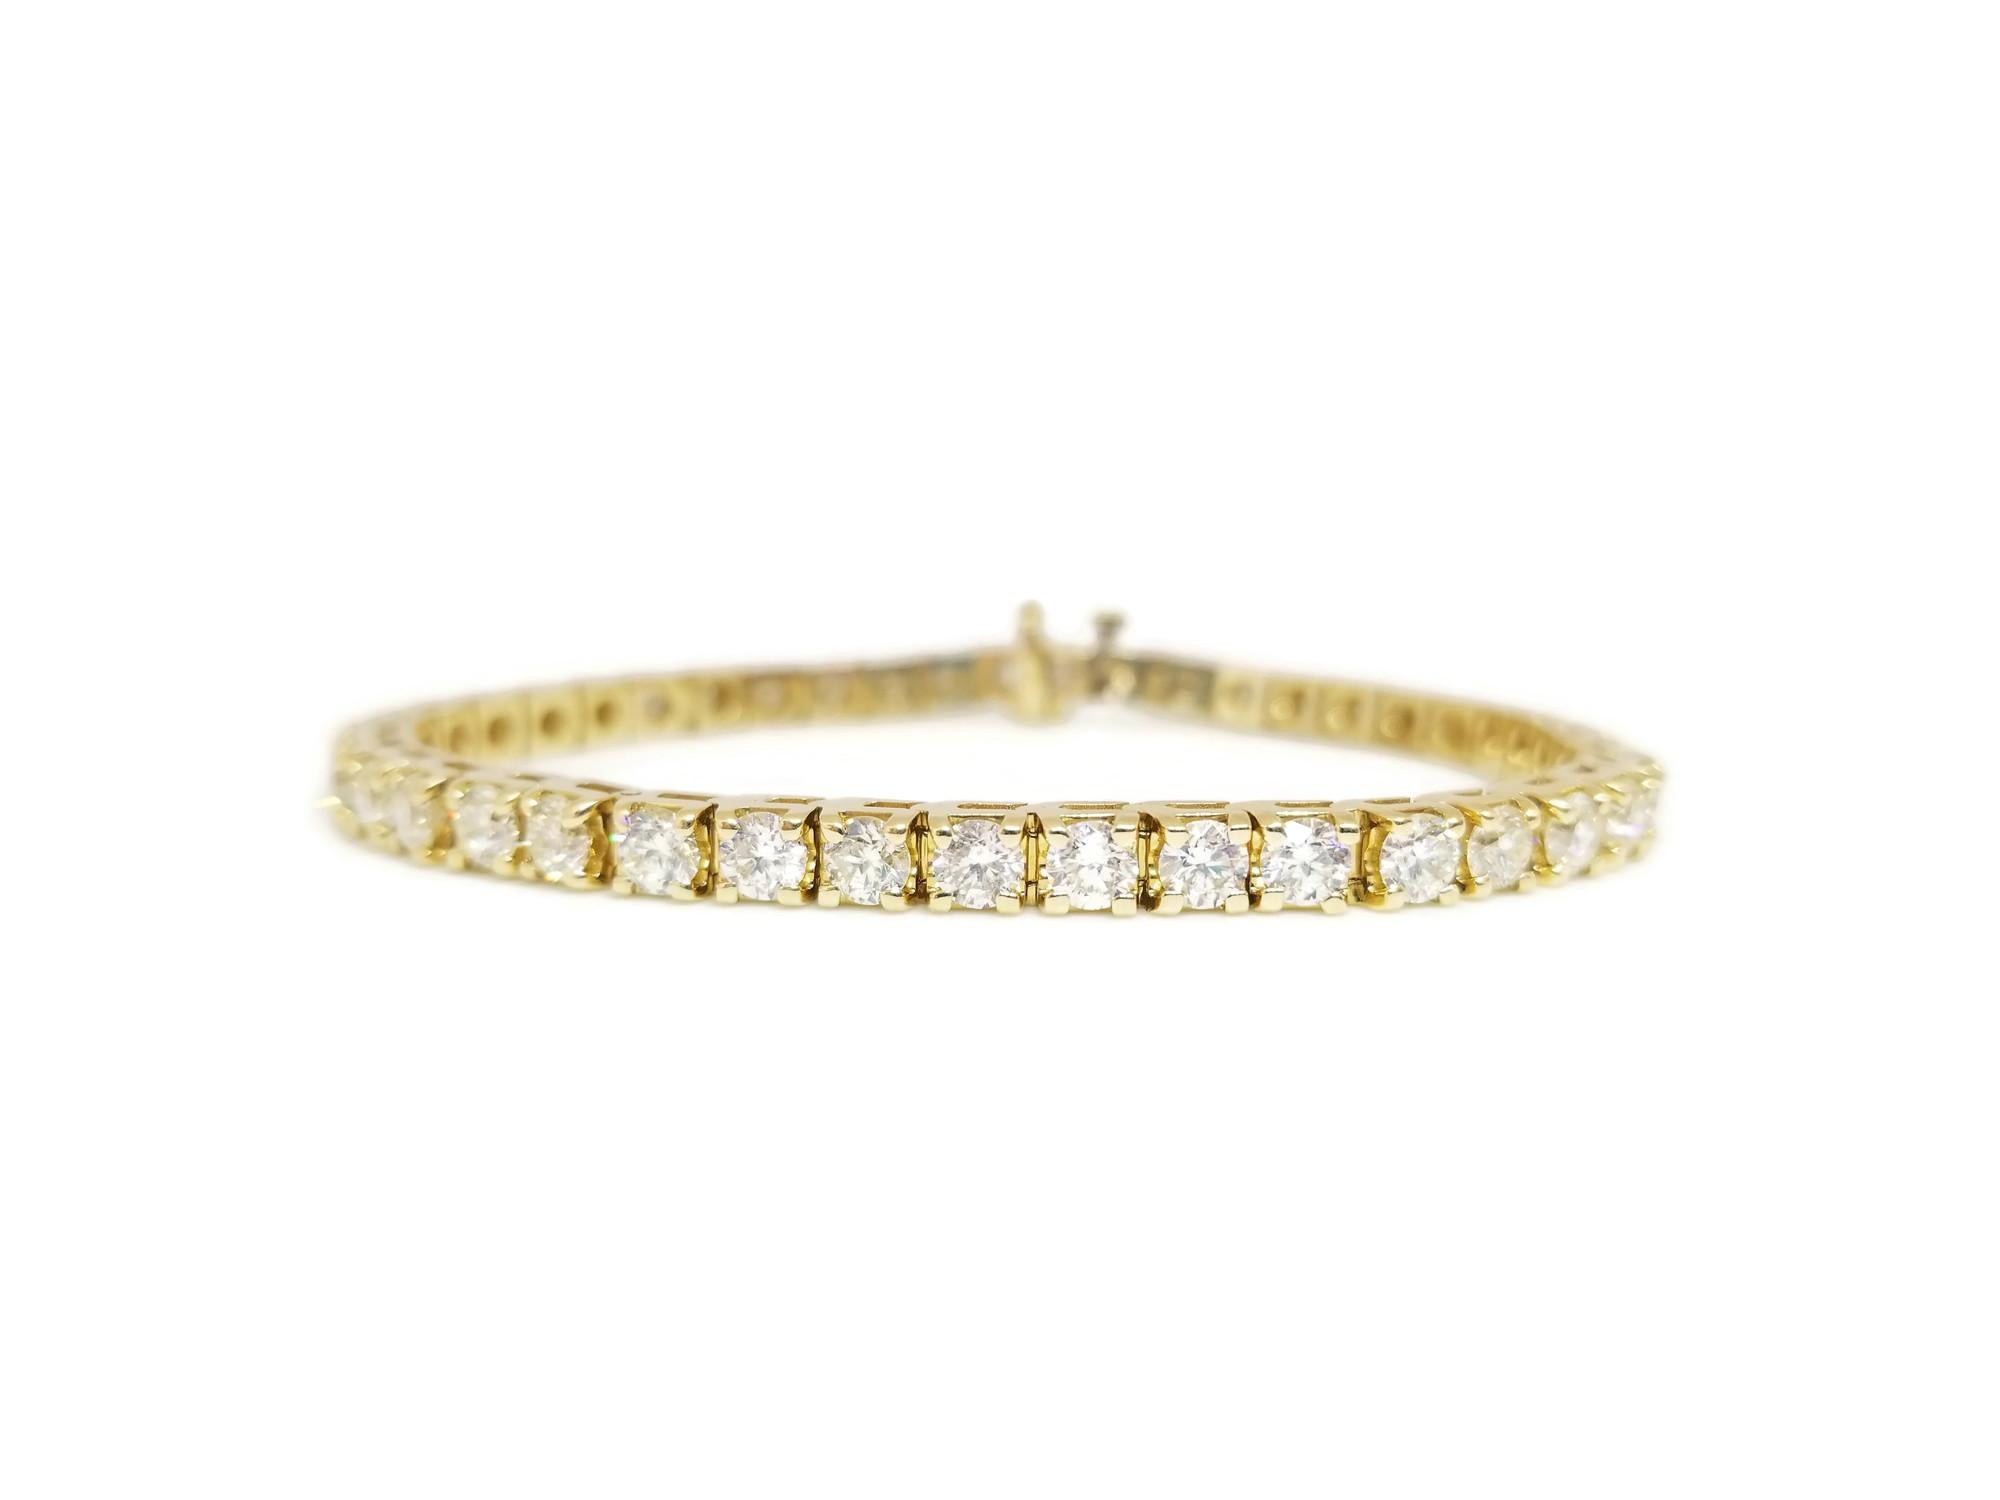 Quality tennis bracelet, containing 42 pcs of natural round-brilliant cut diamonds. set on 14k yellow gold. 
each stone is set in a classic four-prong style for maximum light brilliance. 
7 inch length. Average Color H-I, Clarity VS-SI.